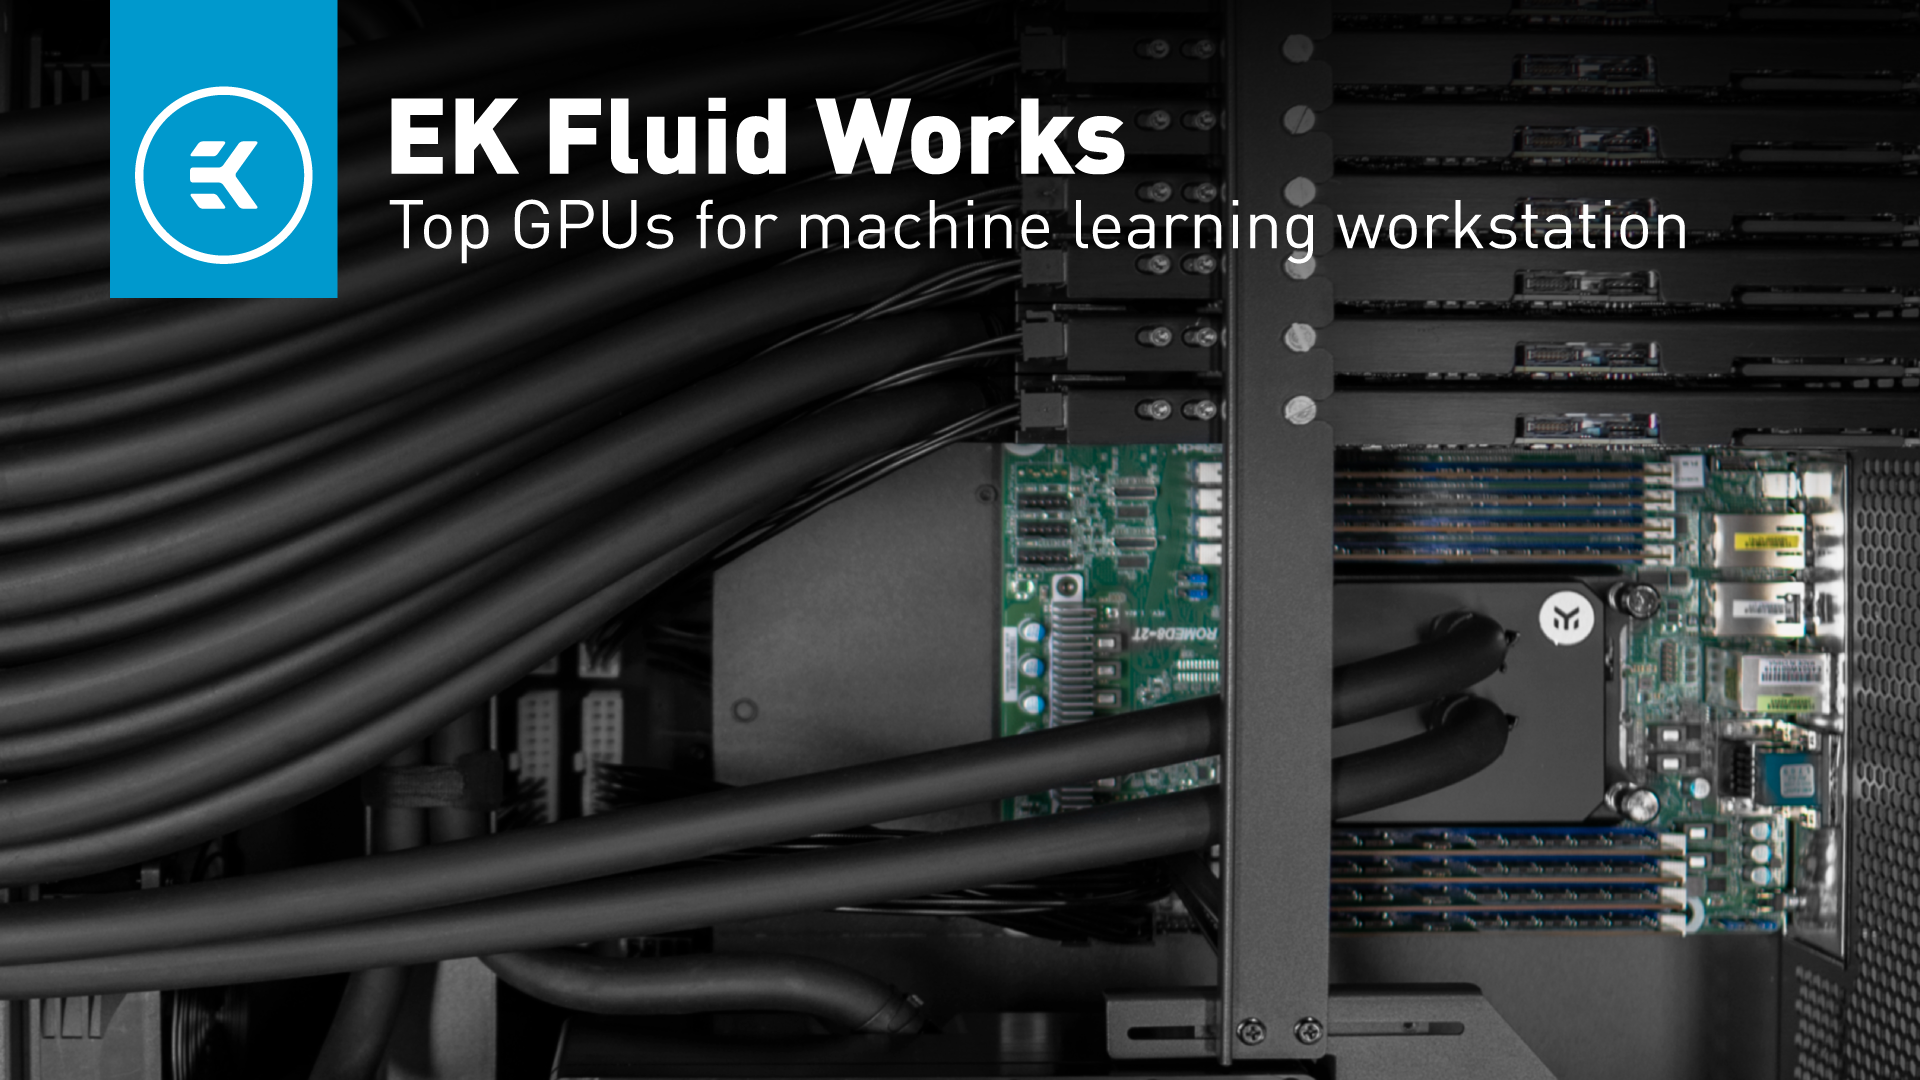 Top GPUs for machine learning workstations